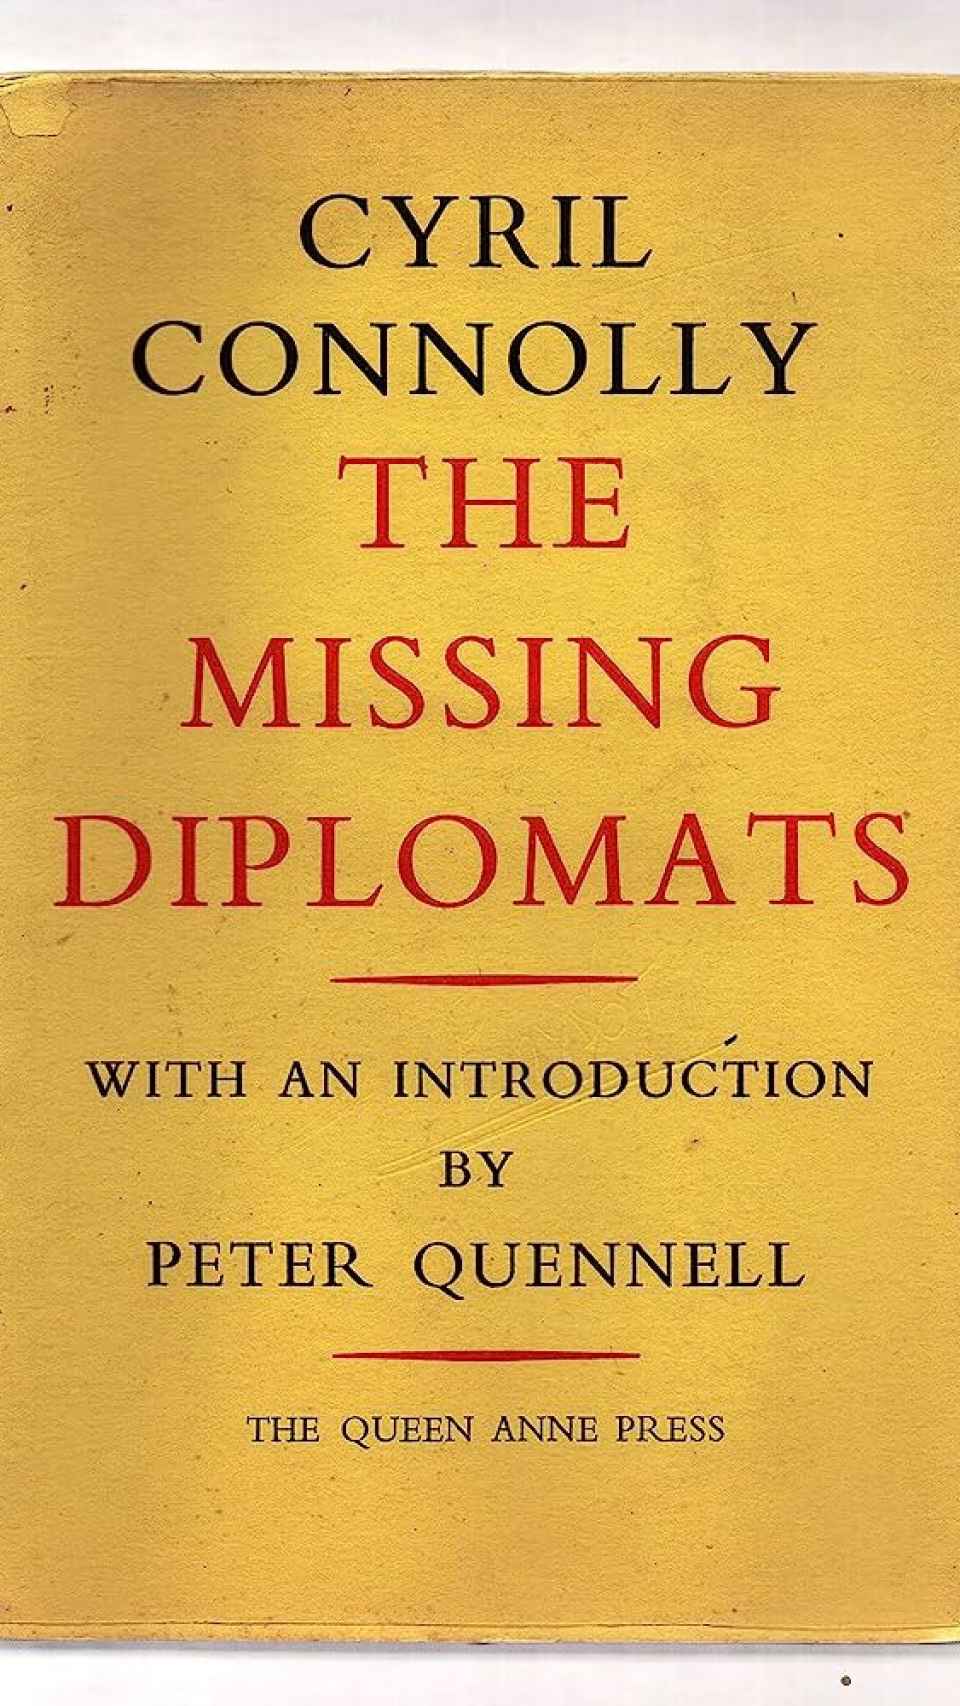 'The Missing Diplomats'